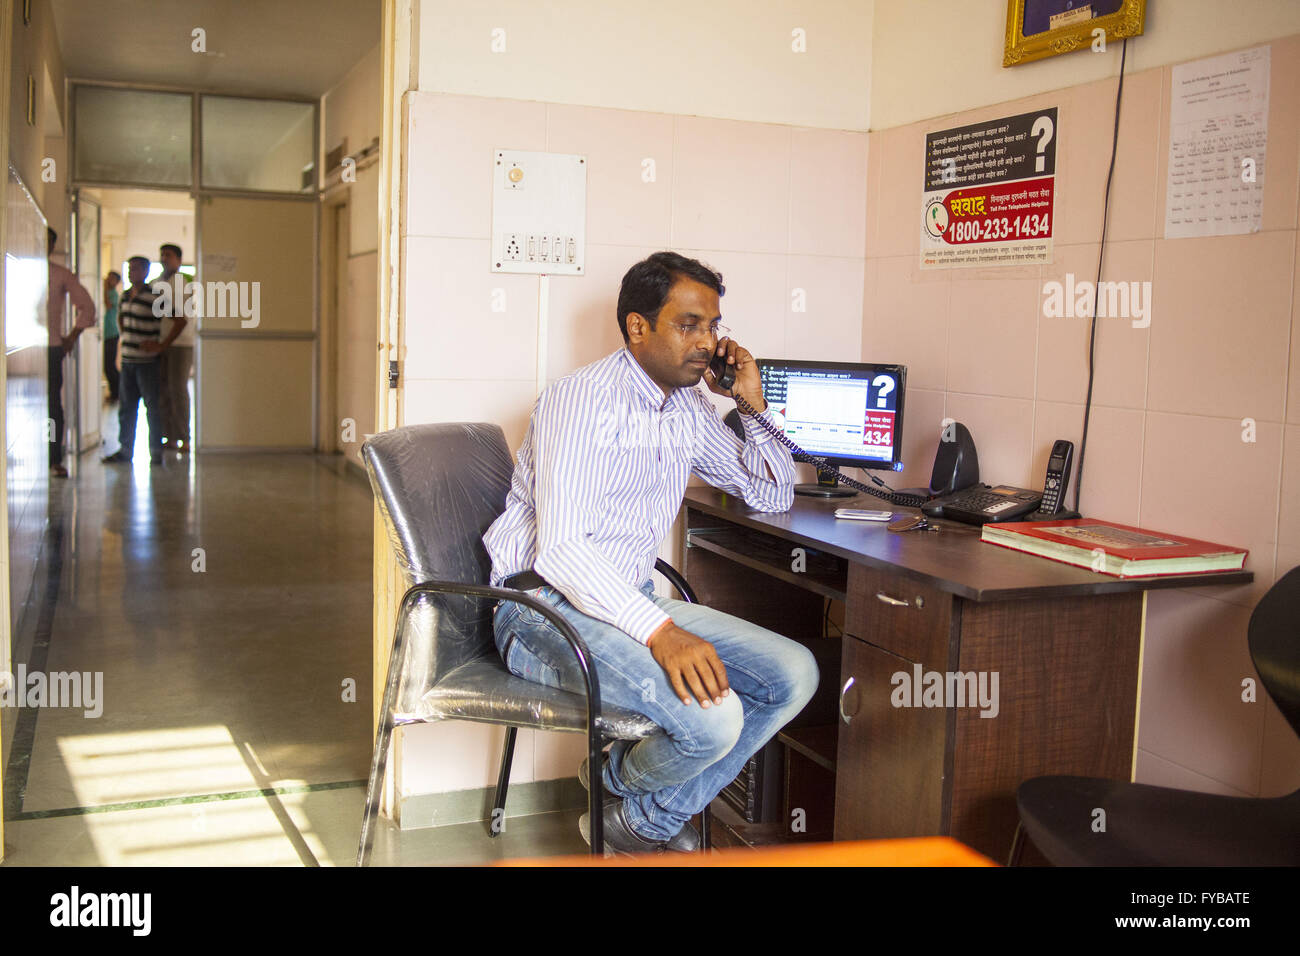 Latur, Maharashtra. 20th Apr, 2016. 20 April 2016 - Latur - INDIA.Dr. Milind Potdar, a psychiatrist in Latur, has started a telephone helpline so that distressed farmers can reach out for counseling. © Subhash Sharma/ZUMA Wire/Alamy Live News Stock Photo